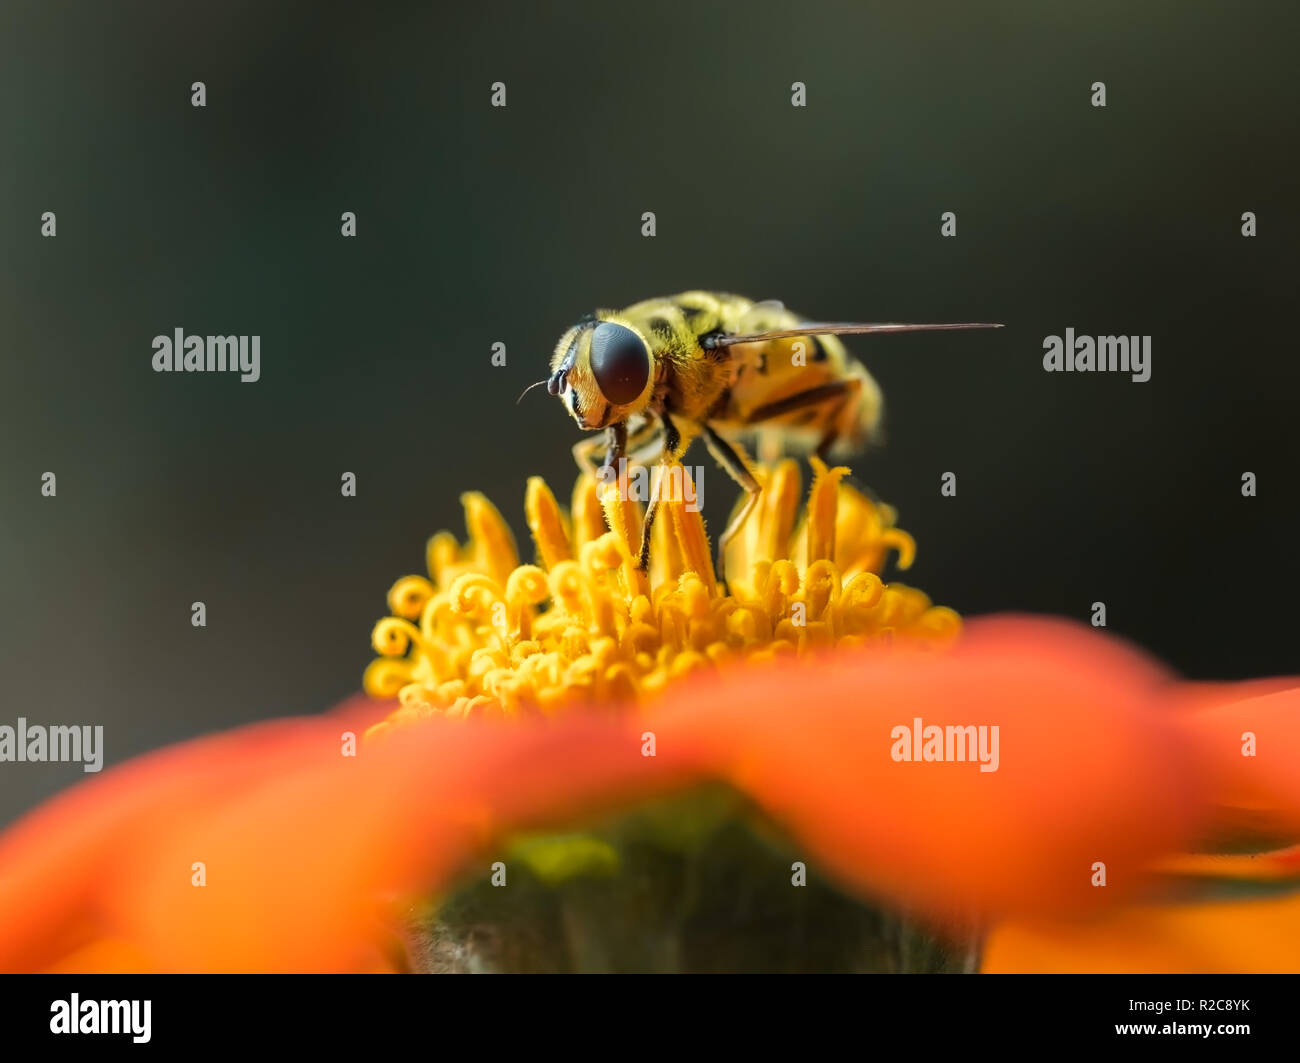 A Hover Fly or Flower Fly (Syrphid) pollinating an orange Mexican Sunflower (Tithonia rotundifolia). Stock Photo